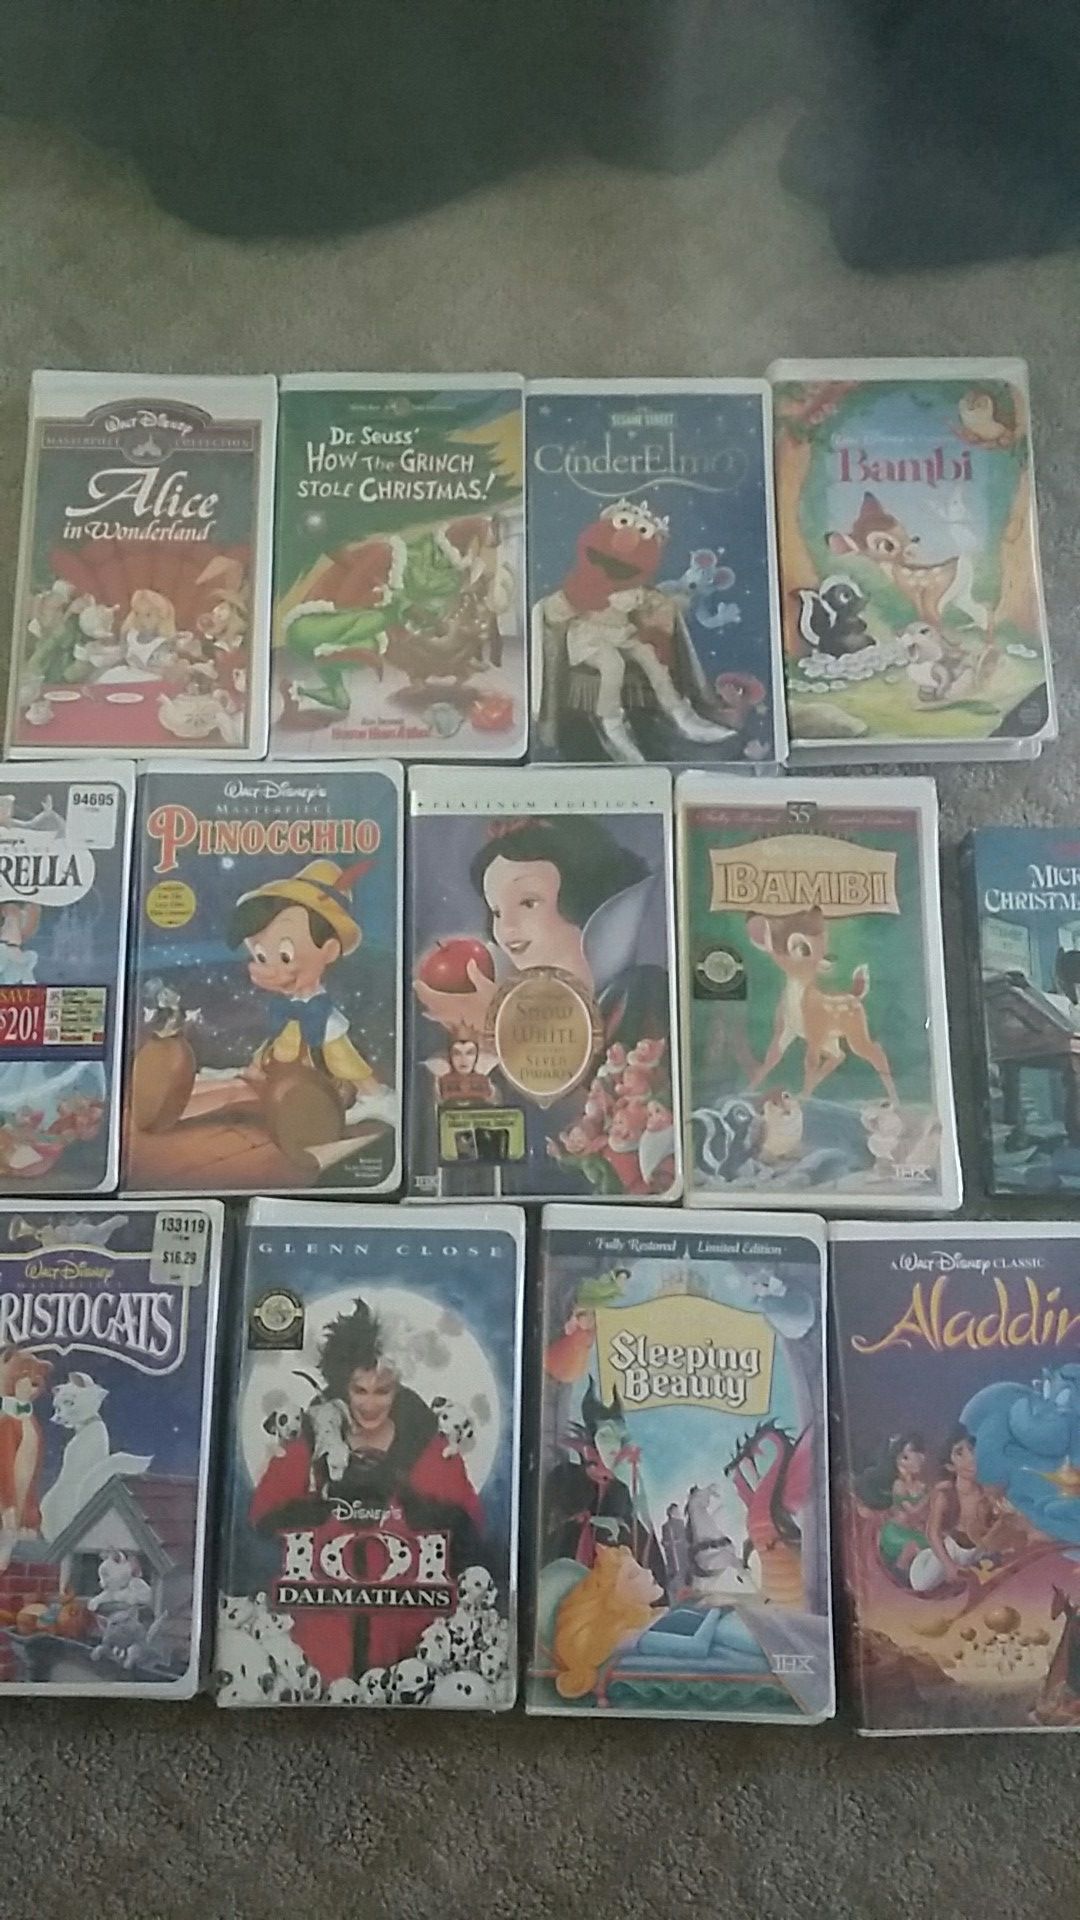 13 VHS Disney movies. 8 are new 5 used and work. The e.t. Scooba wizard of Oz and Shrek for free